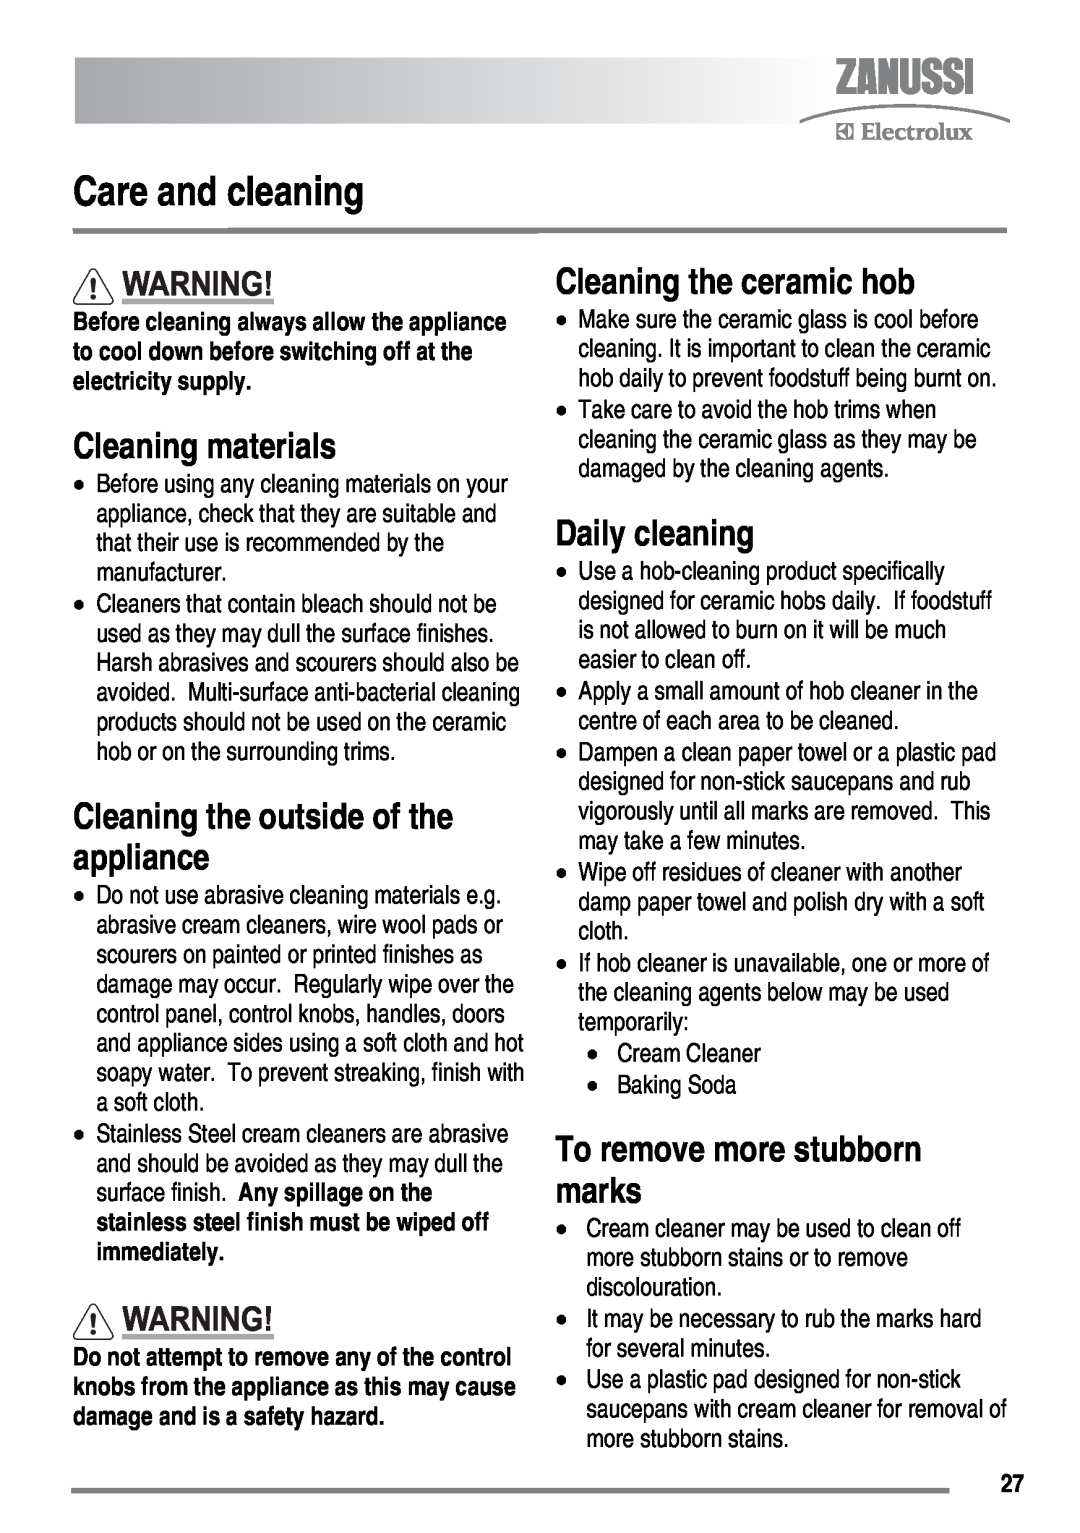 Zanussi ZKC6020 Care and cleaning, Cleaning materials, Cleaning the outside of the appliance, Cleaning the ceramic hob 